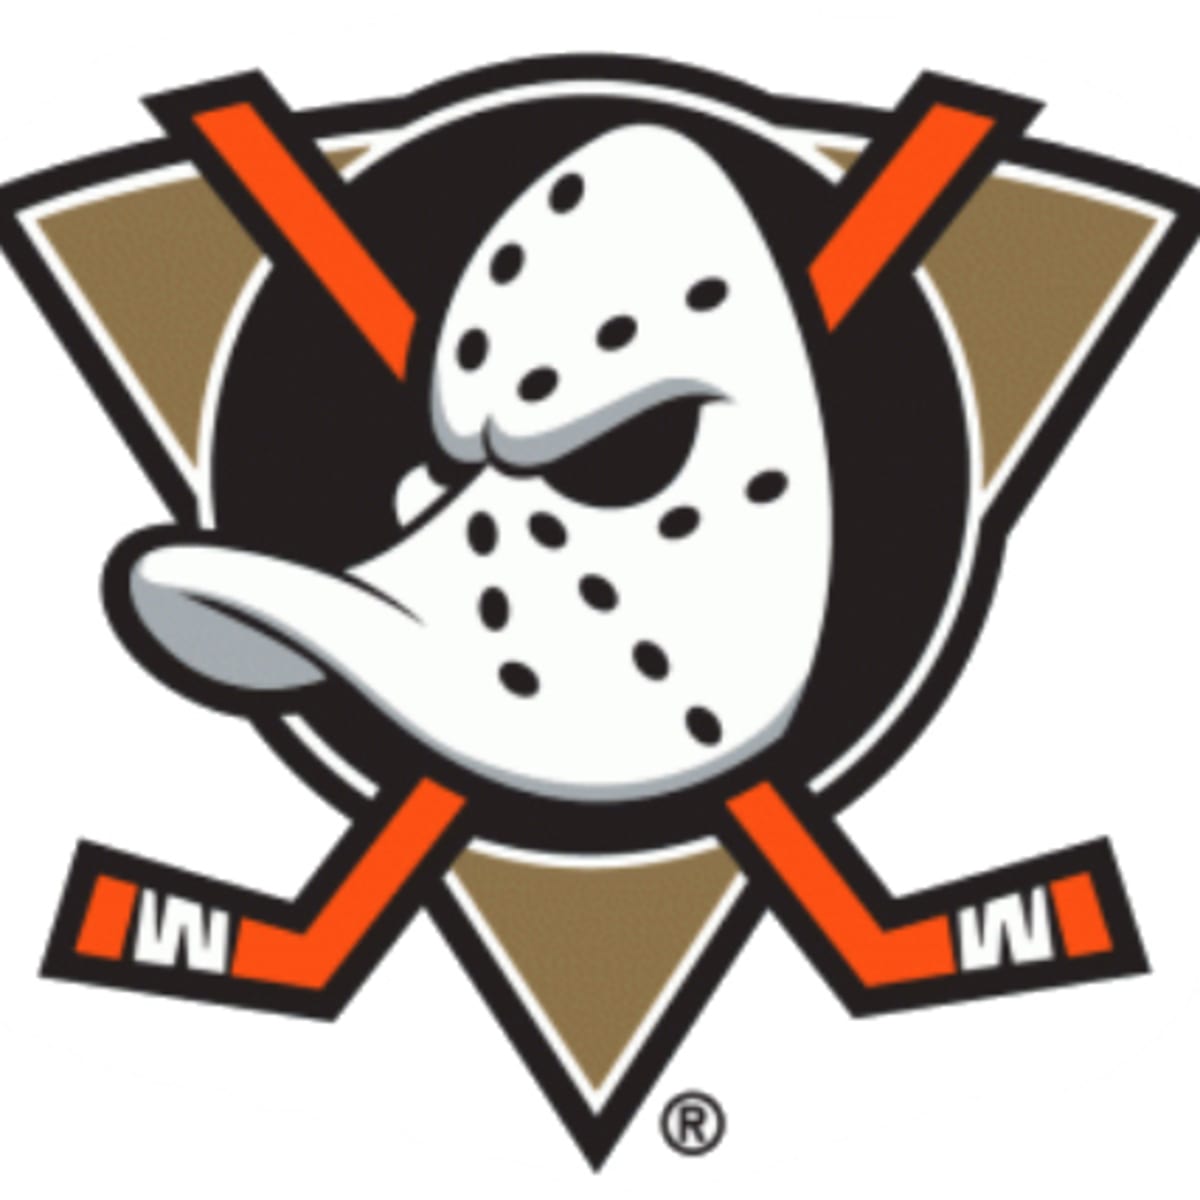 LOOK: Anaheim Ducks to be 'Mighty' again with new third jerseys? 